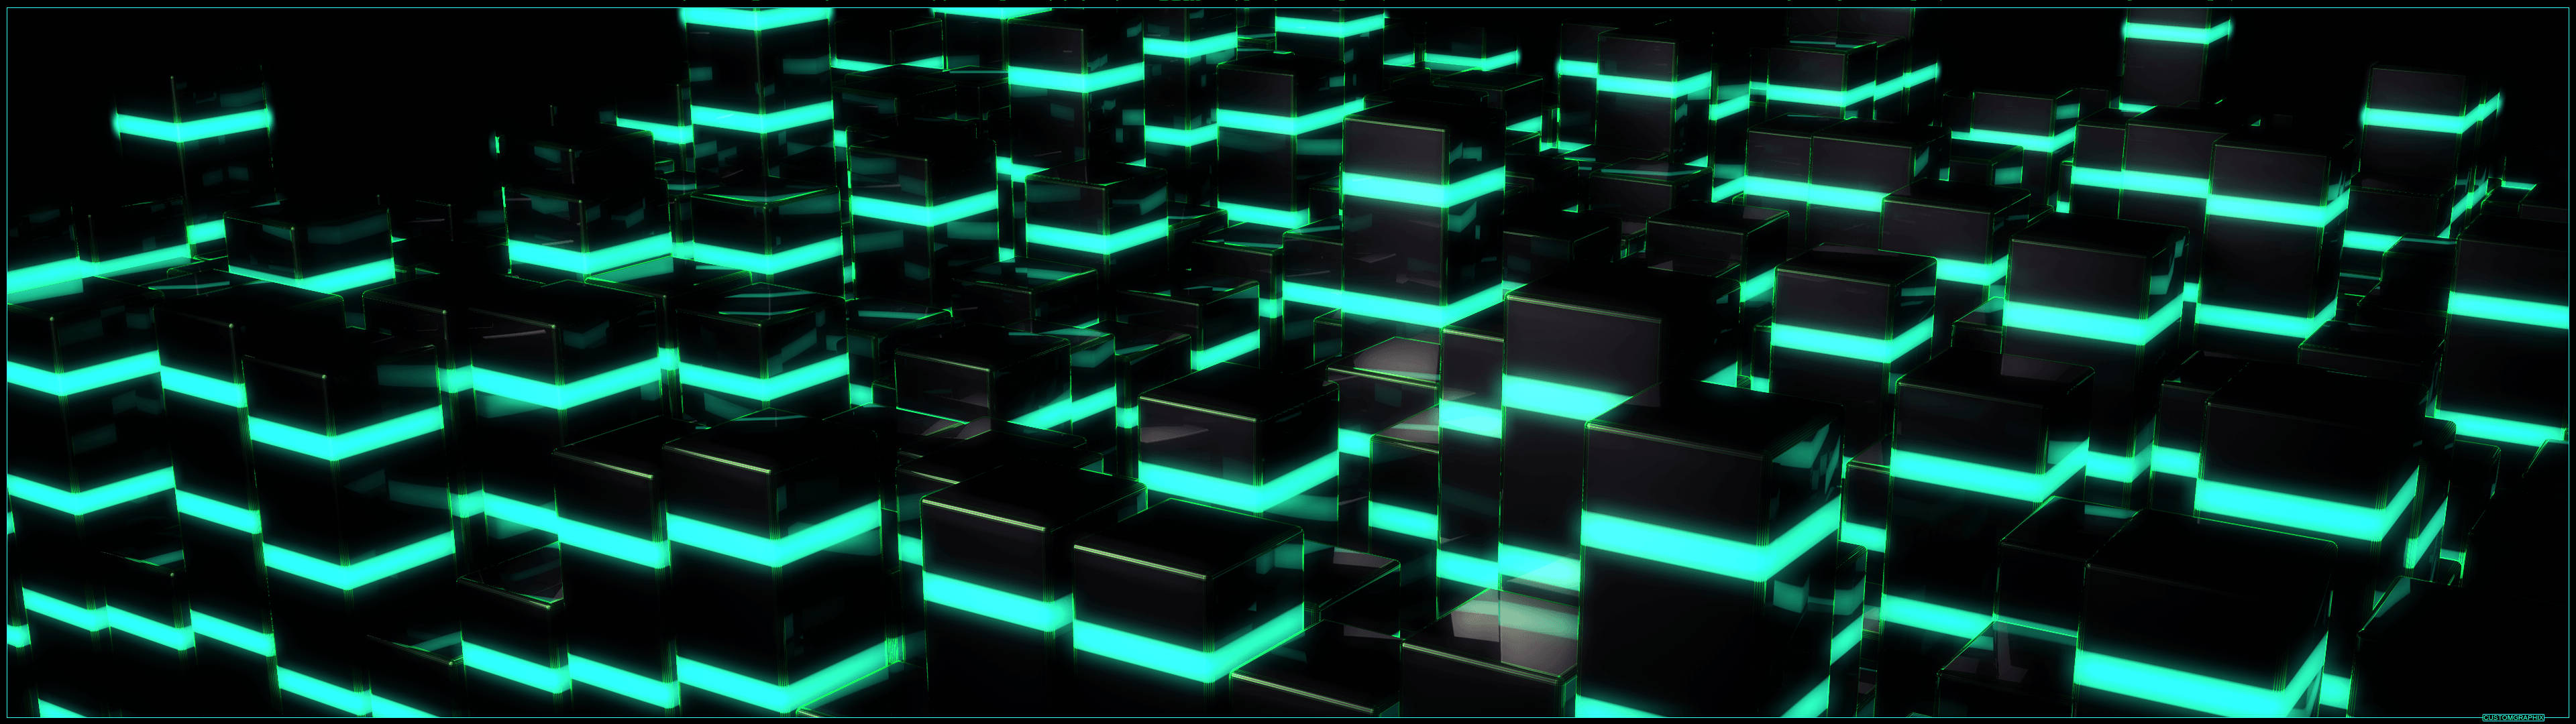 3840x1080 Neon Abstract Art Background